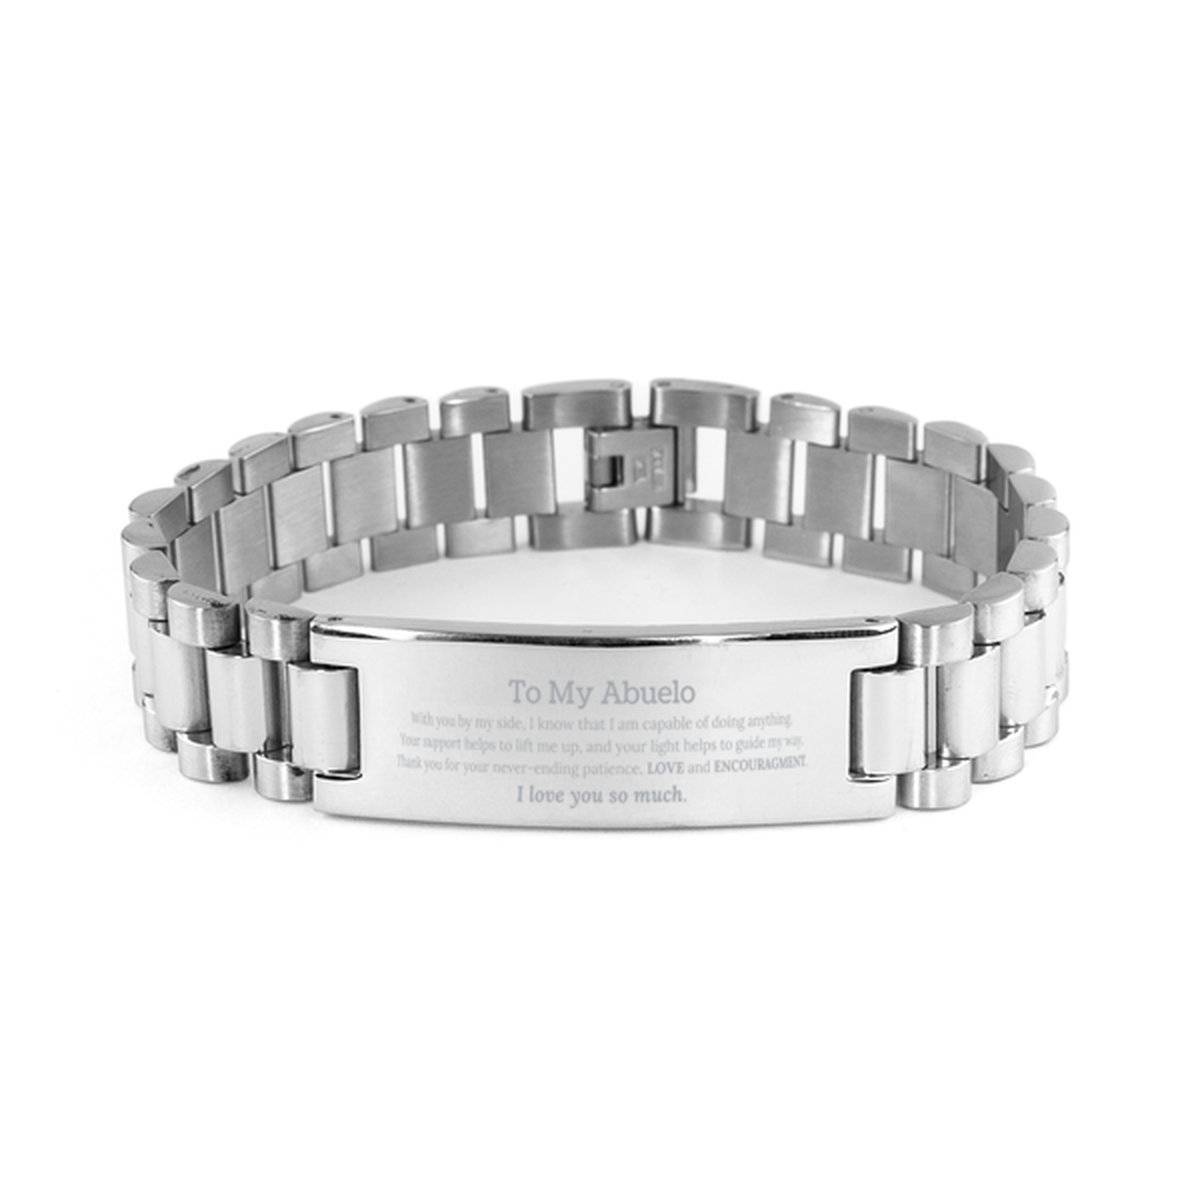 Appreciation Abuelo Ladder Stainless Steel Bracelet Gifts, To My Abuelo Birthday Christmas Wedding Keepsake Gifts for Abuelo With you by my side, I know that I am capable of doing anything. I love you so much